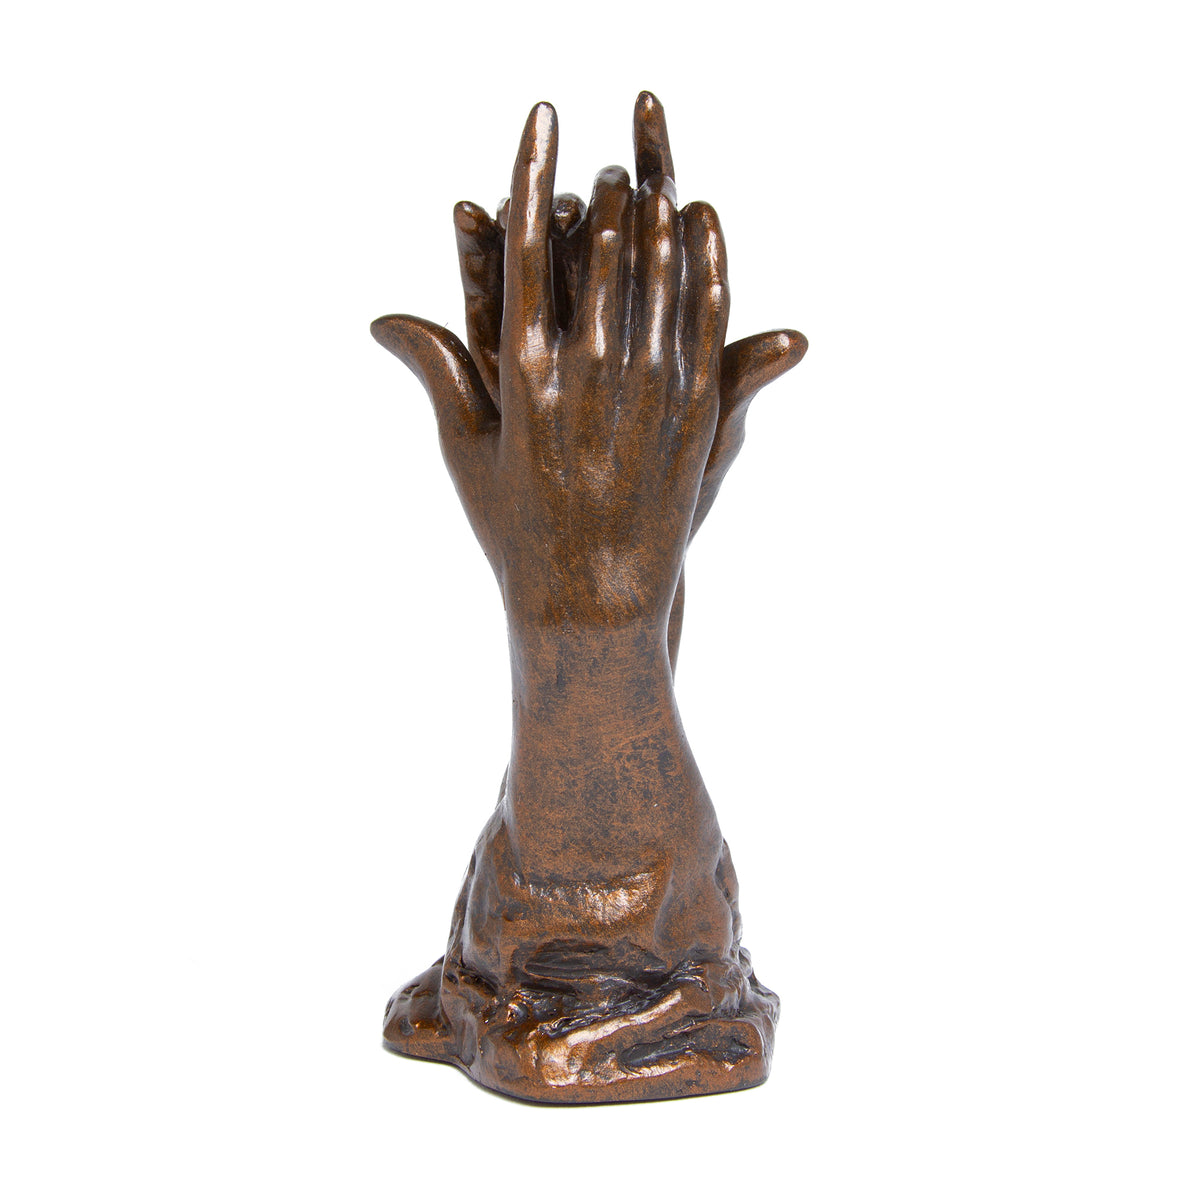 Miniature Hands by Auguste Rodin | Getty Store